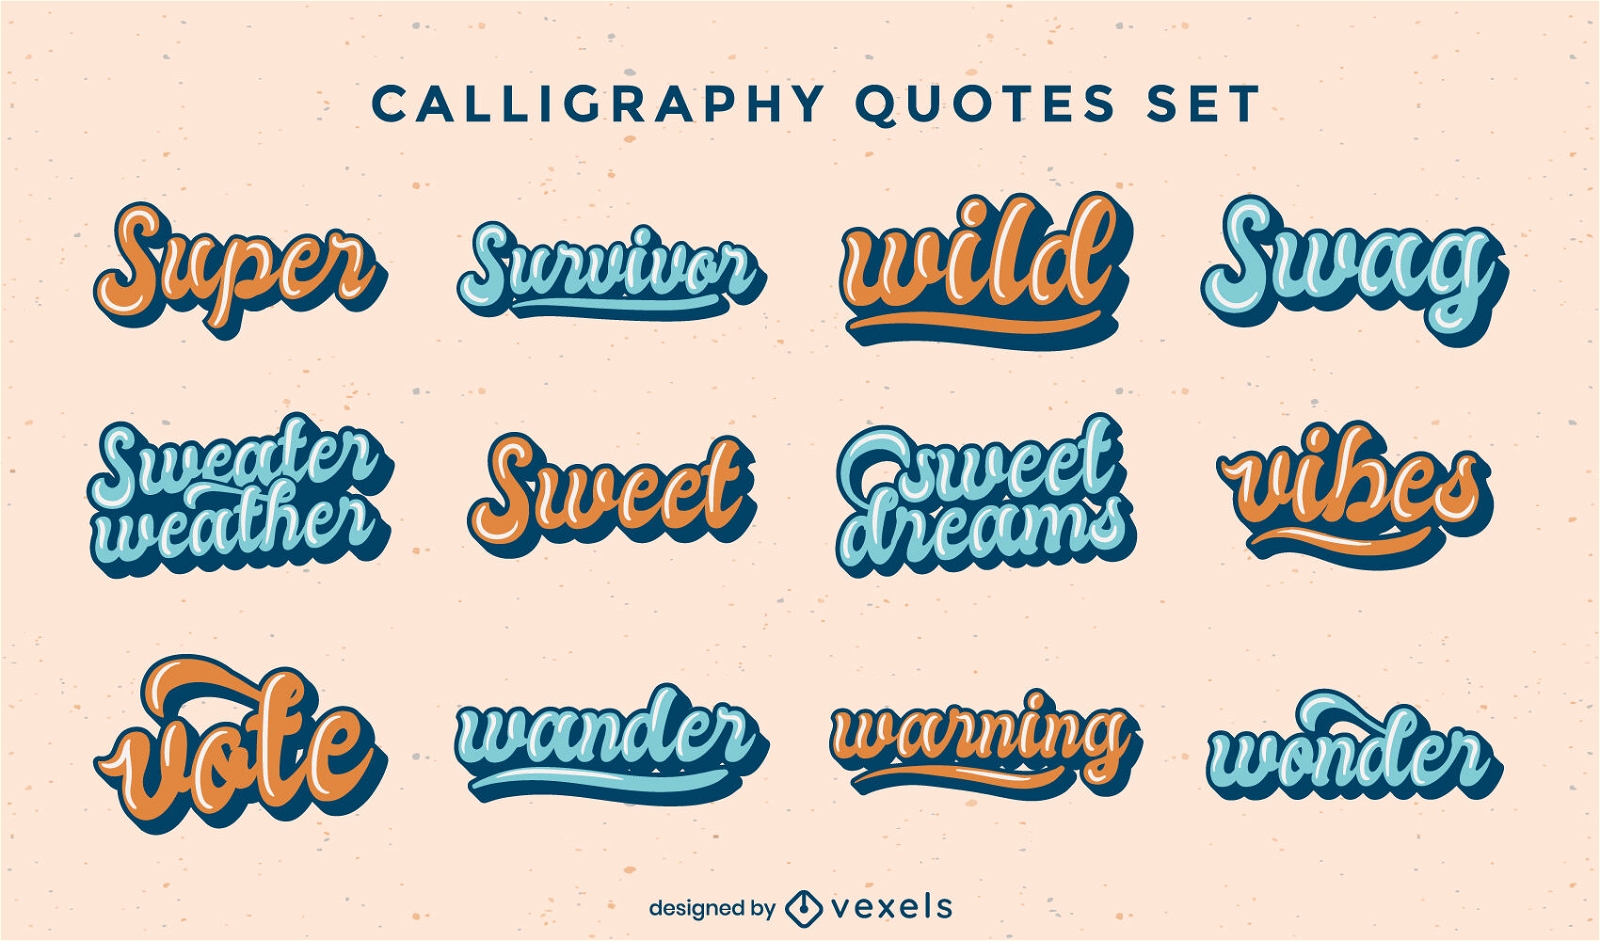 Cool calligraphy quotes set